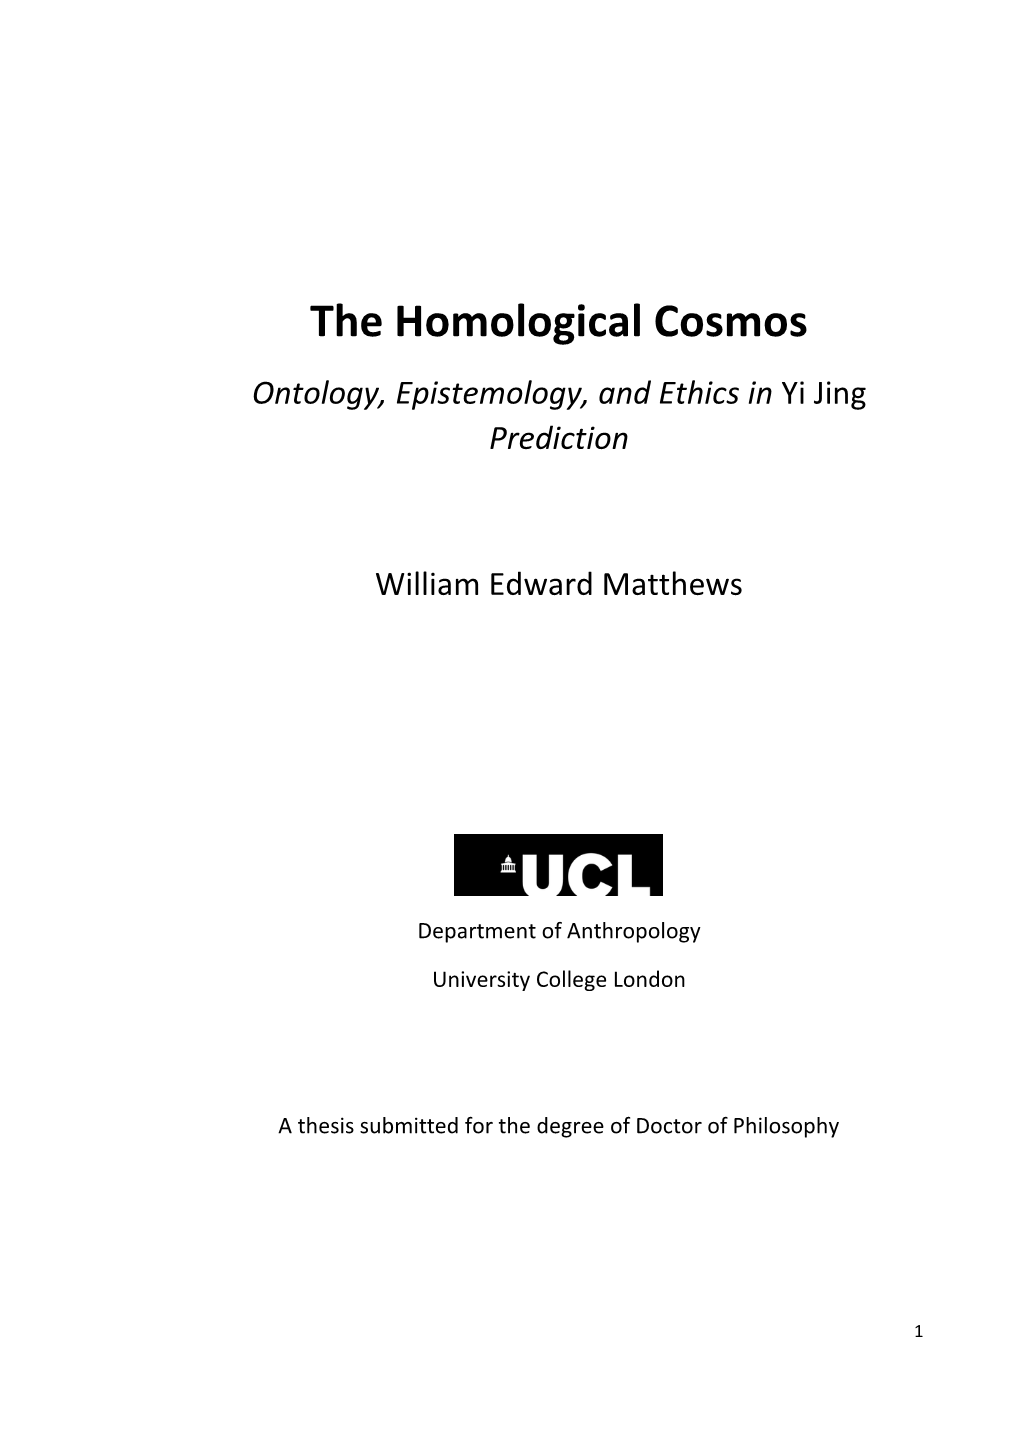 The Homological Cosmos Ontology, Epistemology, and Ethics in Yi Jing Prediction